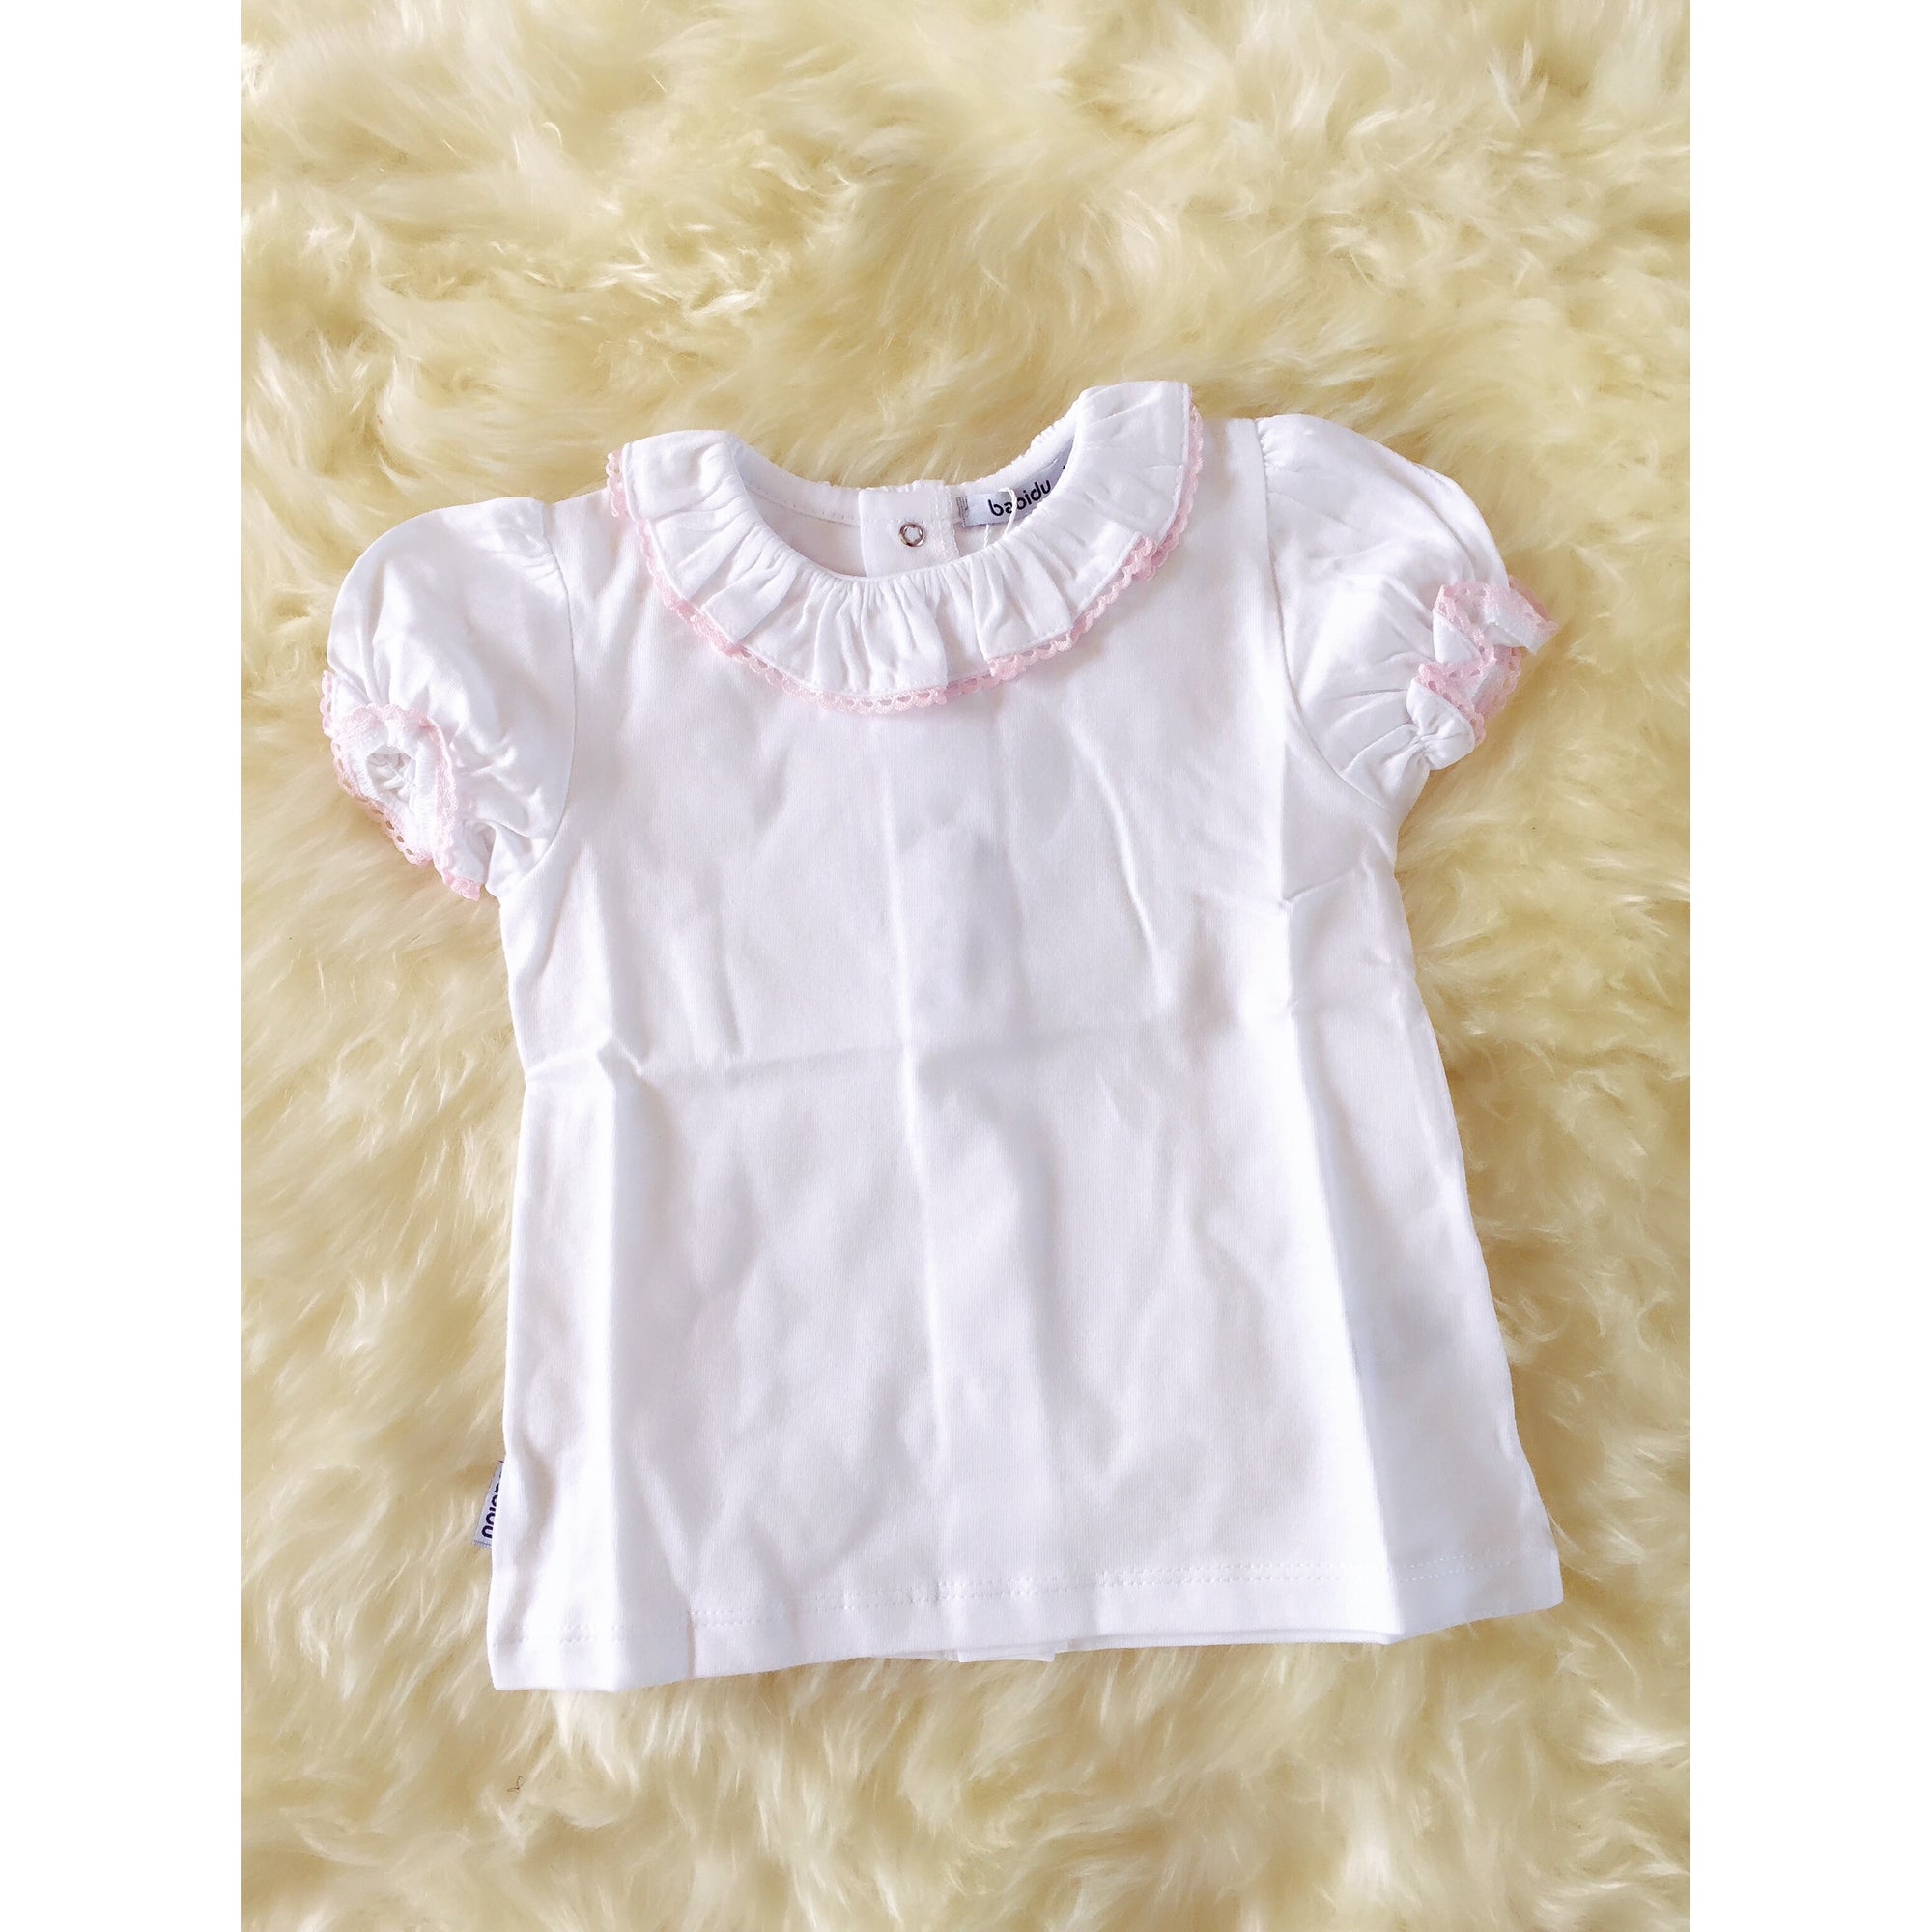 White Short Sleeve Blouse with pink embroidered collar